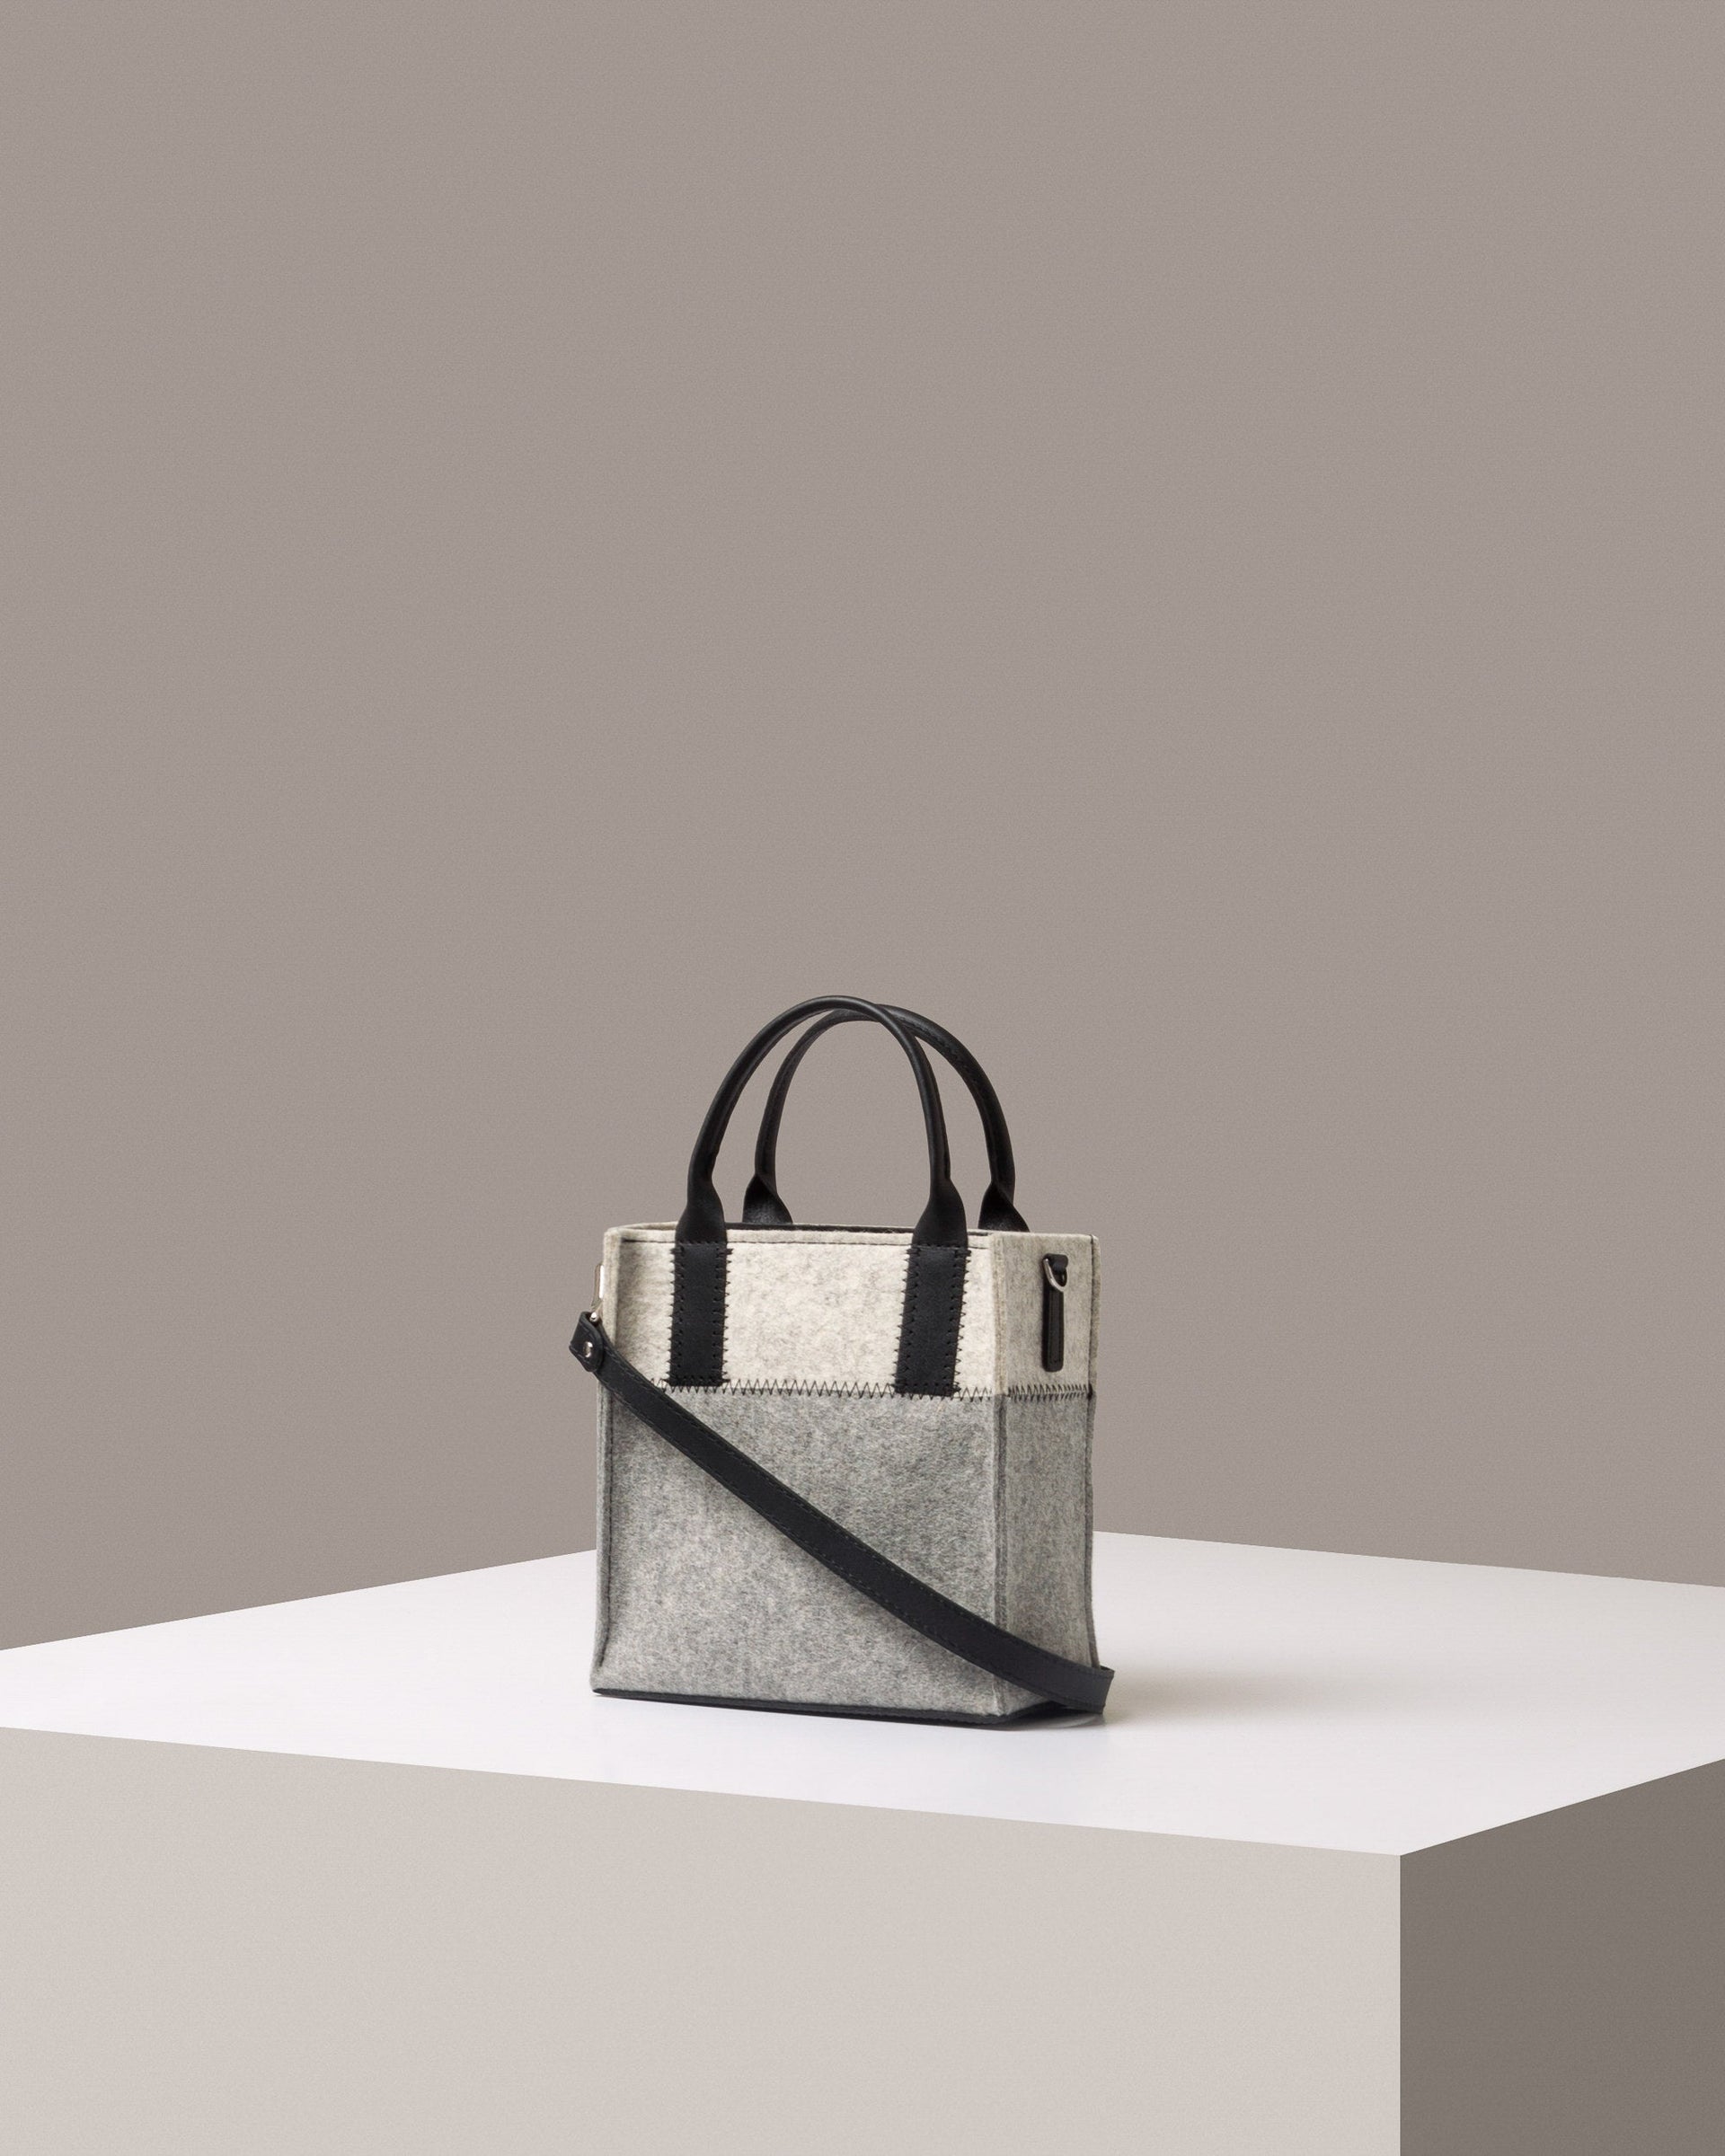 A Jaunt Mini Merino Wool Felt Tote bag in white and grey, with black accents and shoulder strap, displayed in a three-quarter view on a white base